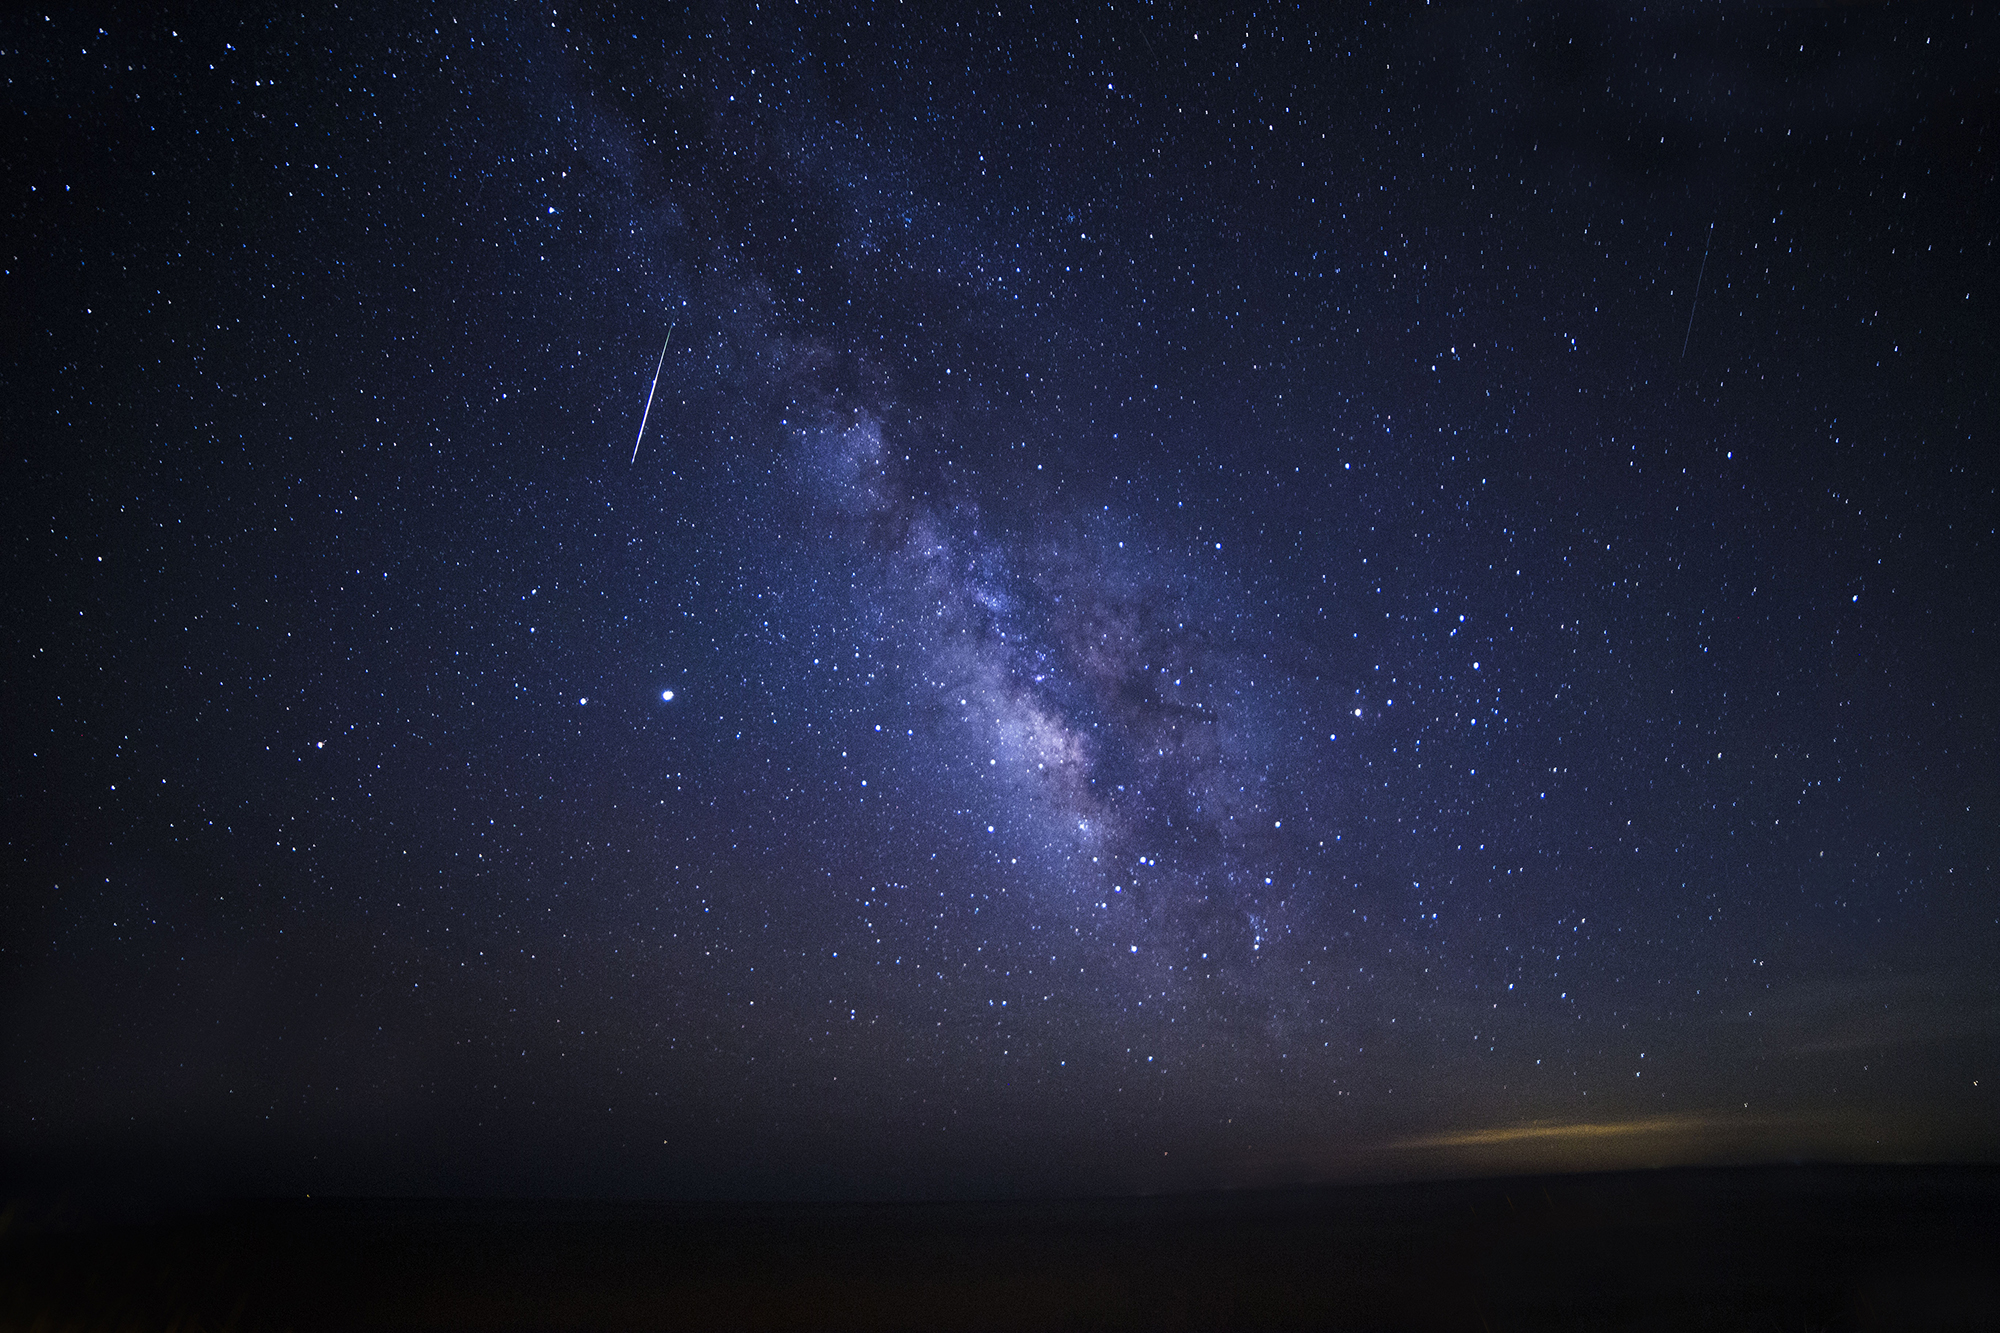 A Lyrid meteor crosses the Milky Way galaxy in this photo taken by Tina Pappas Lee on Fripp Island, South Carolina. The photo was taken at approximately 4:45 a.m. local time on April 22, 2020.